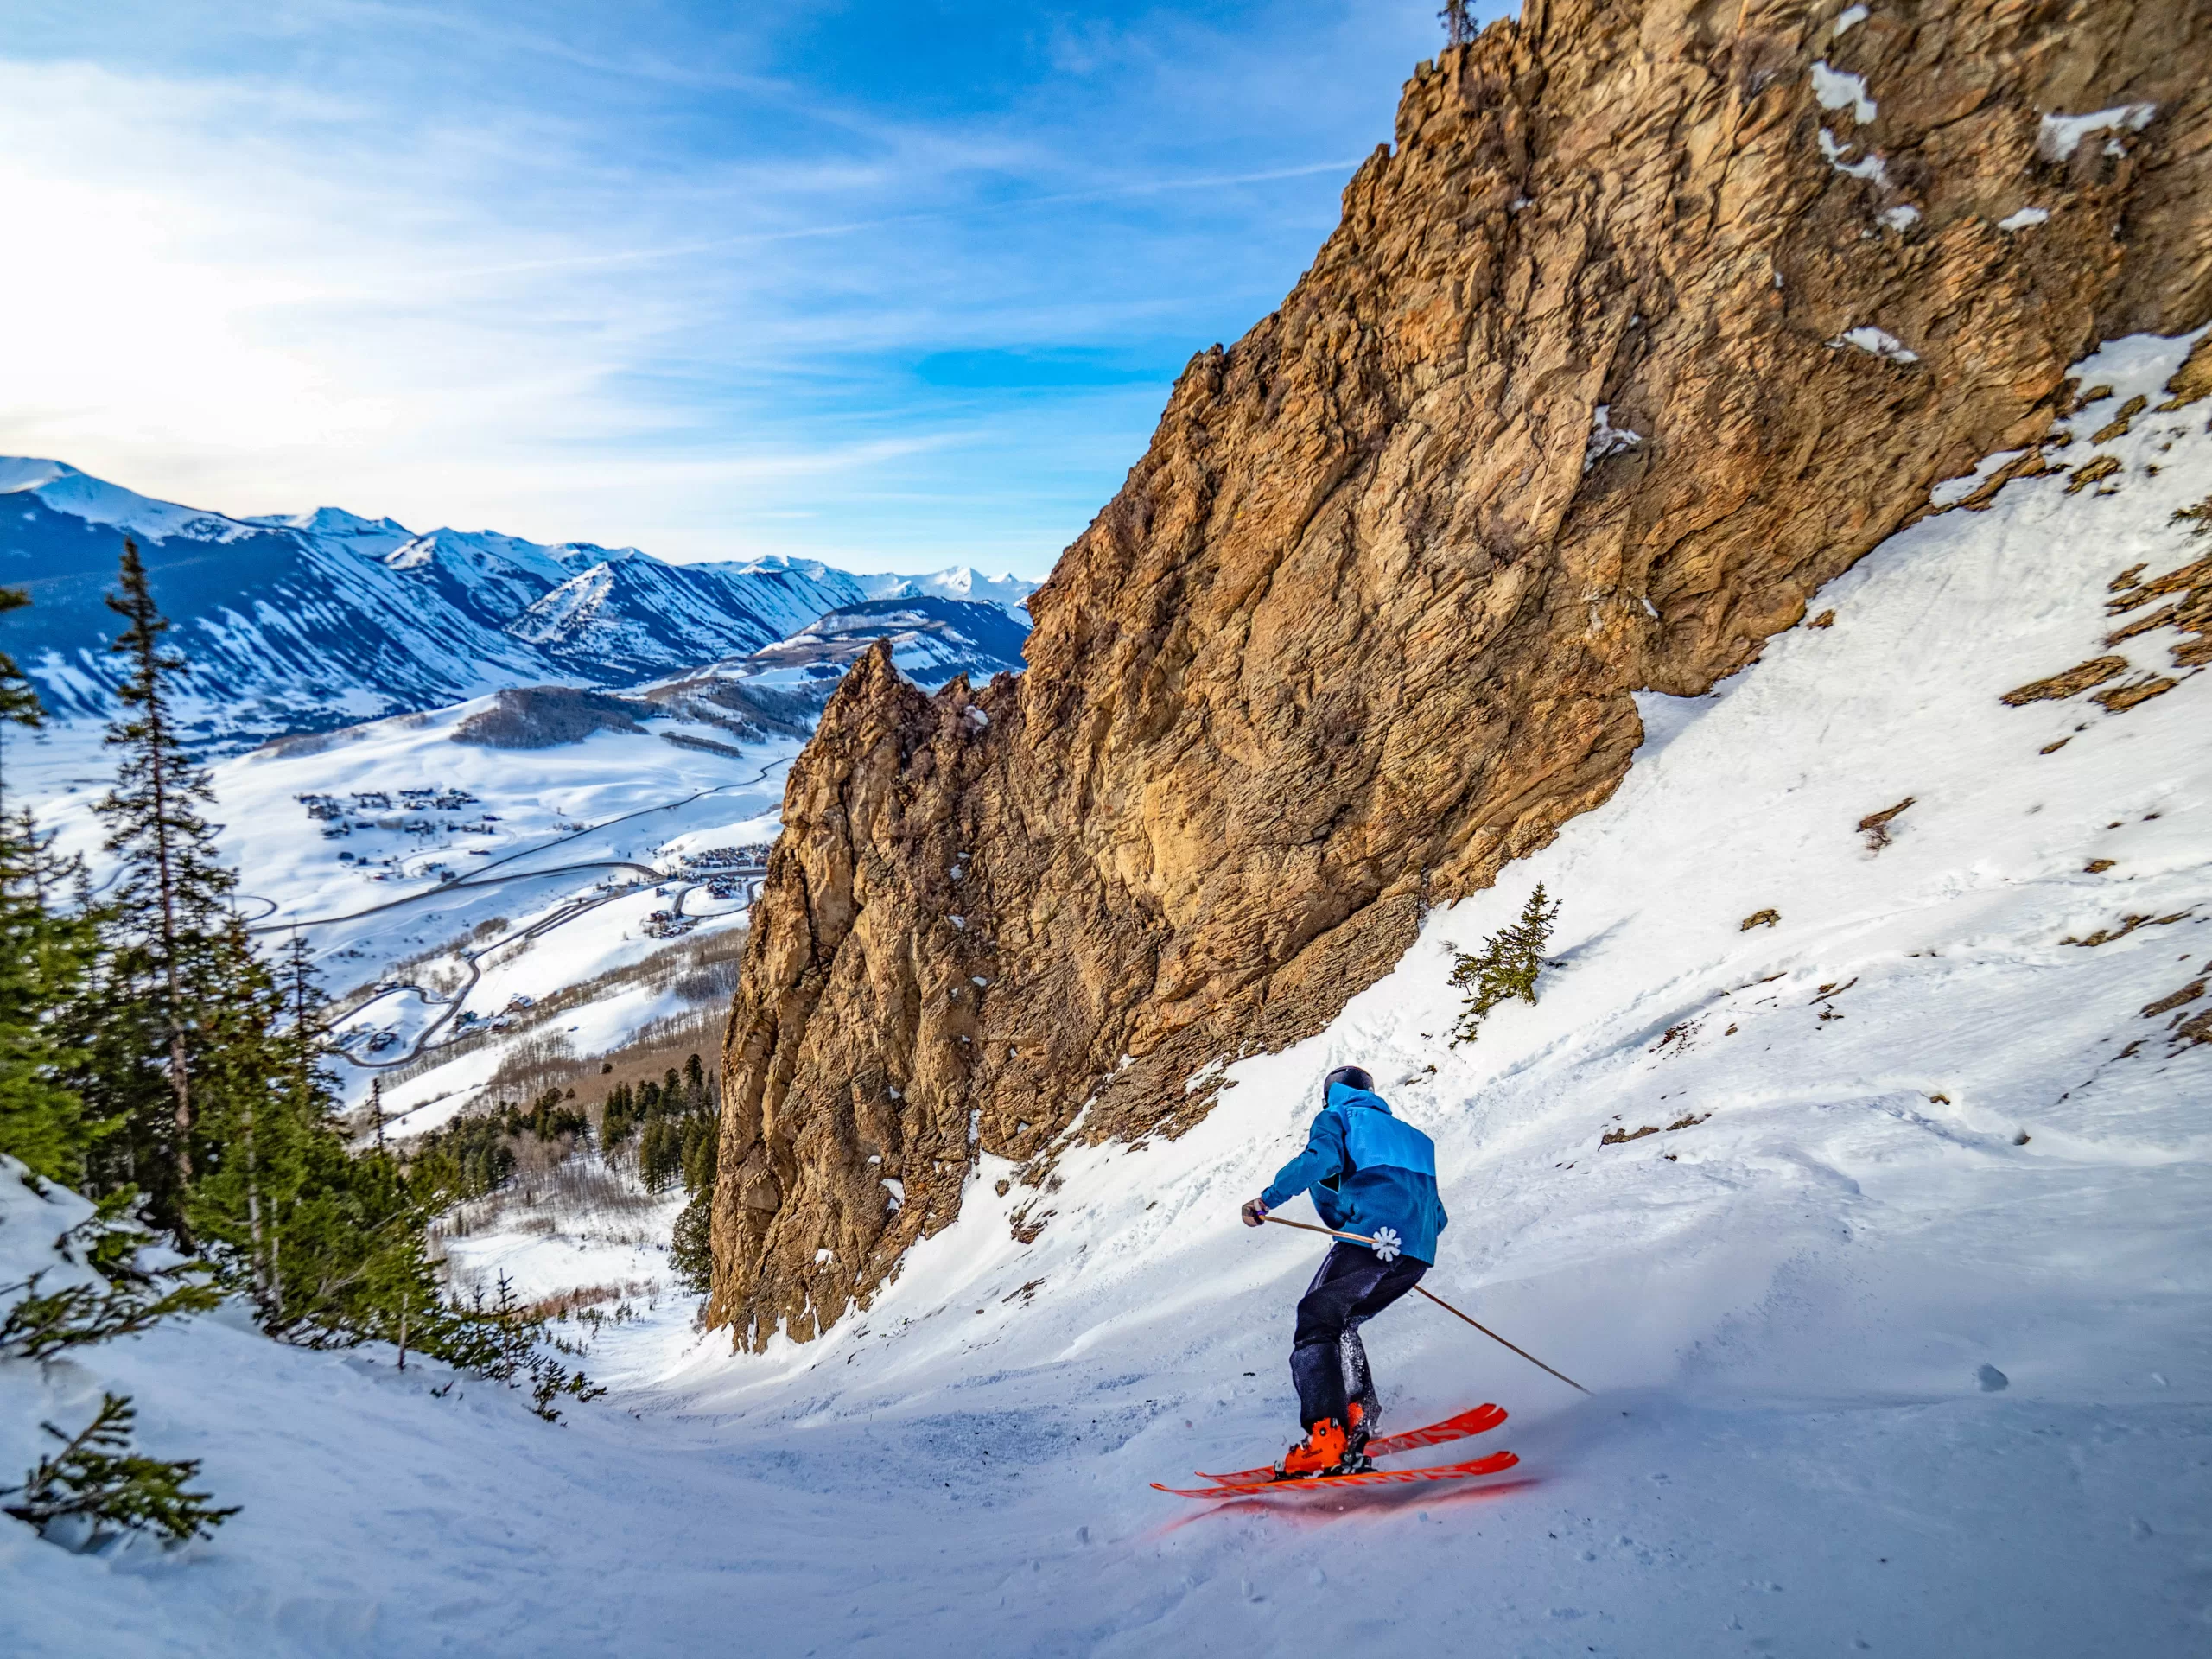 a person skis down a steep chute with snowy peaks in the background